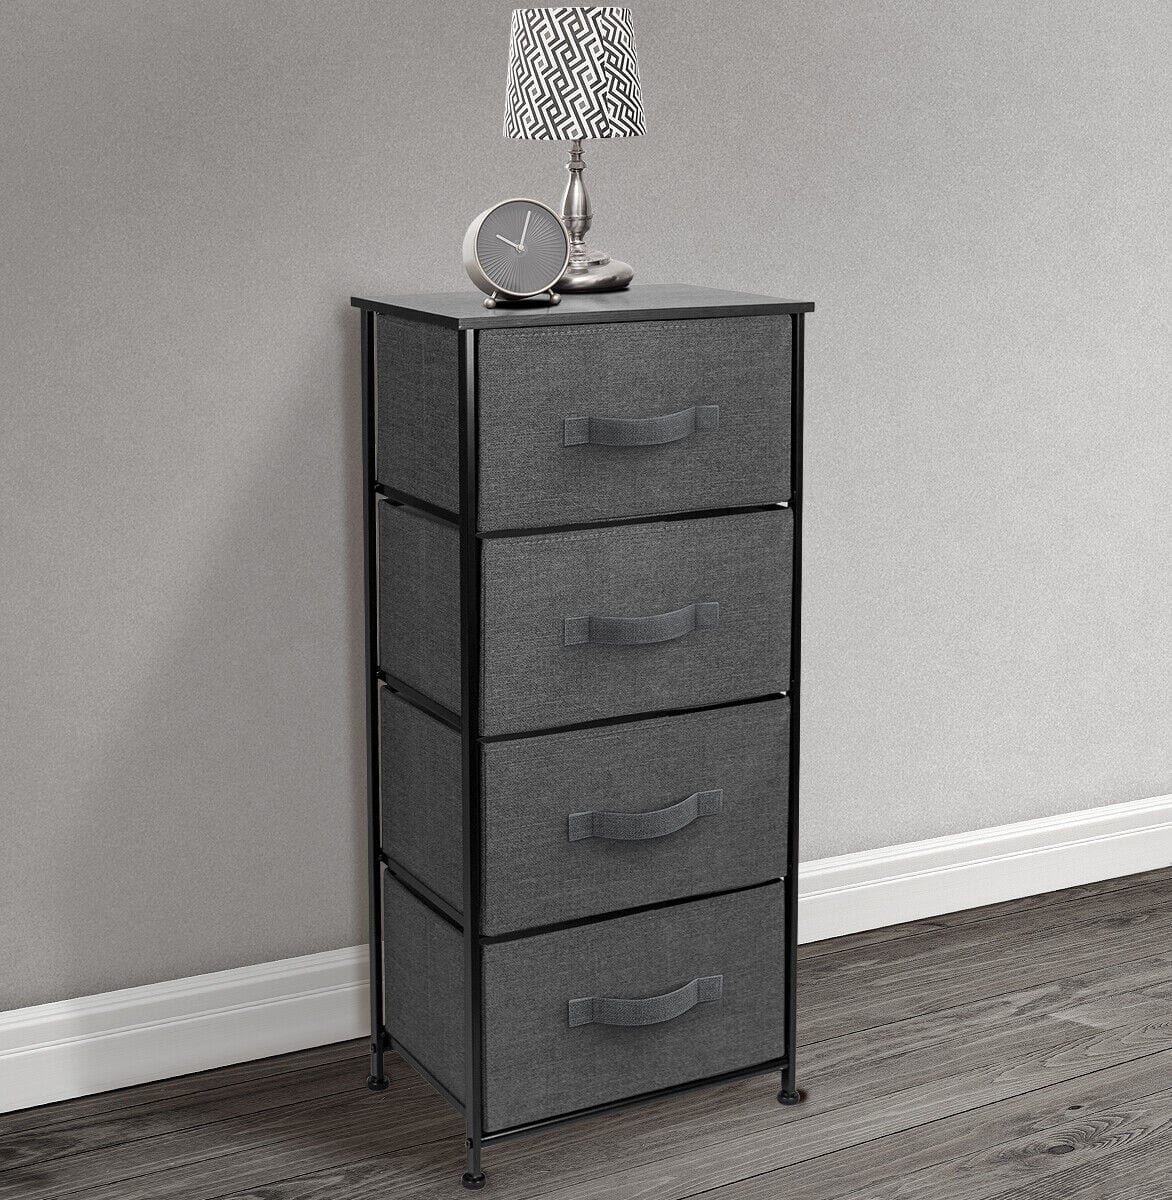 A grey dresser with four drawers and a lamp.